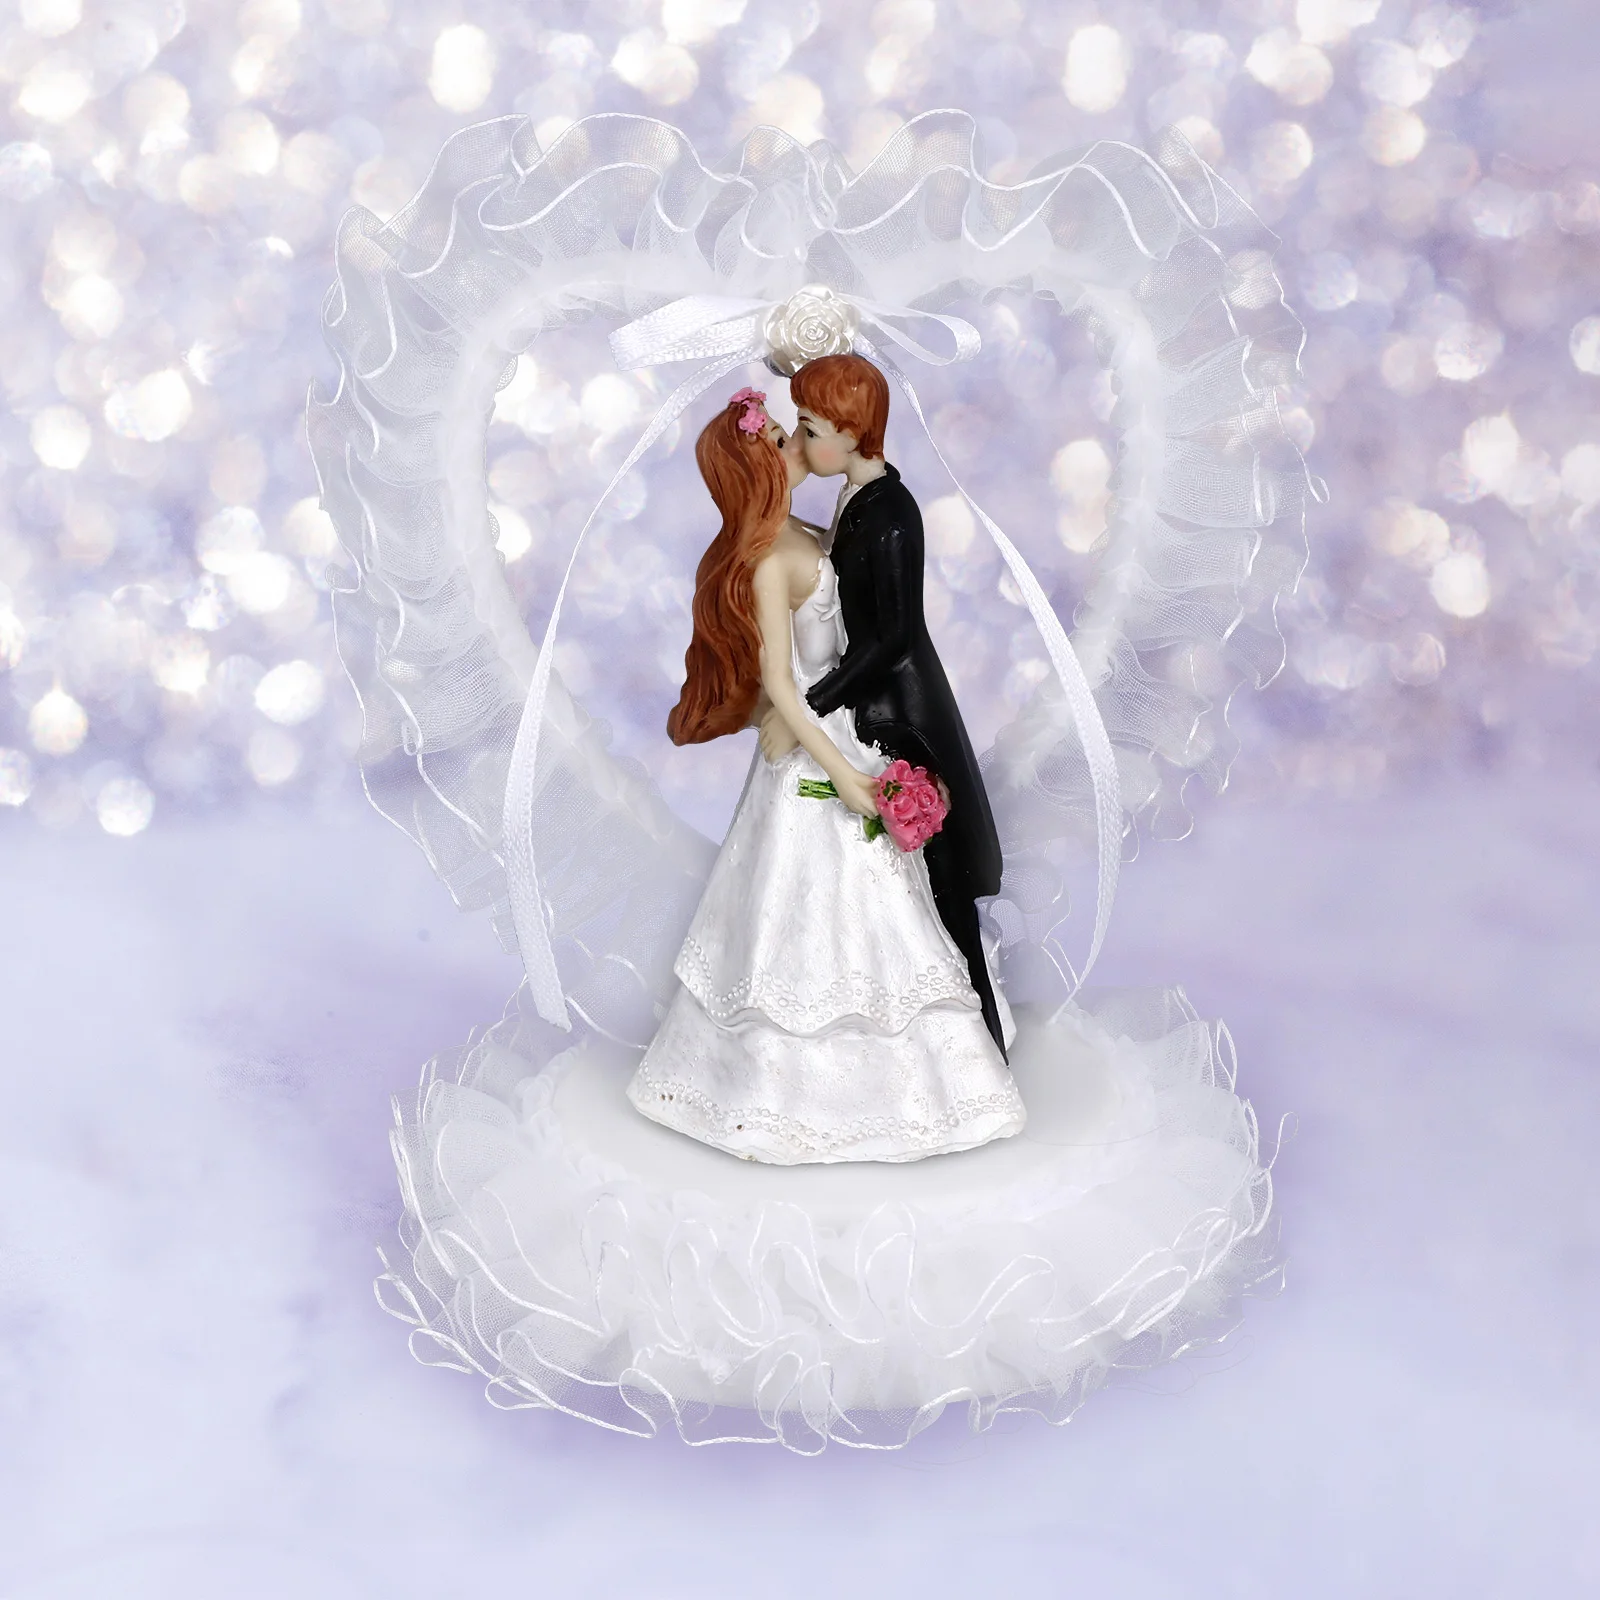 

Bride Groom Cake Topper Wedding Bride and Groom Figurines Creative Couple Action Figure Statues Decorative Marriage Party